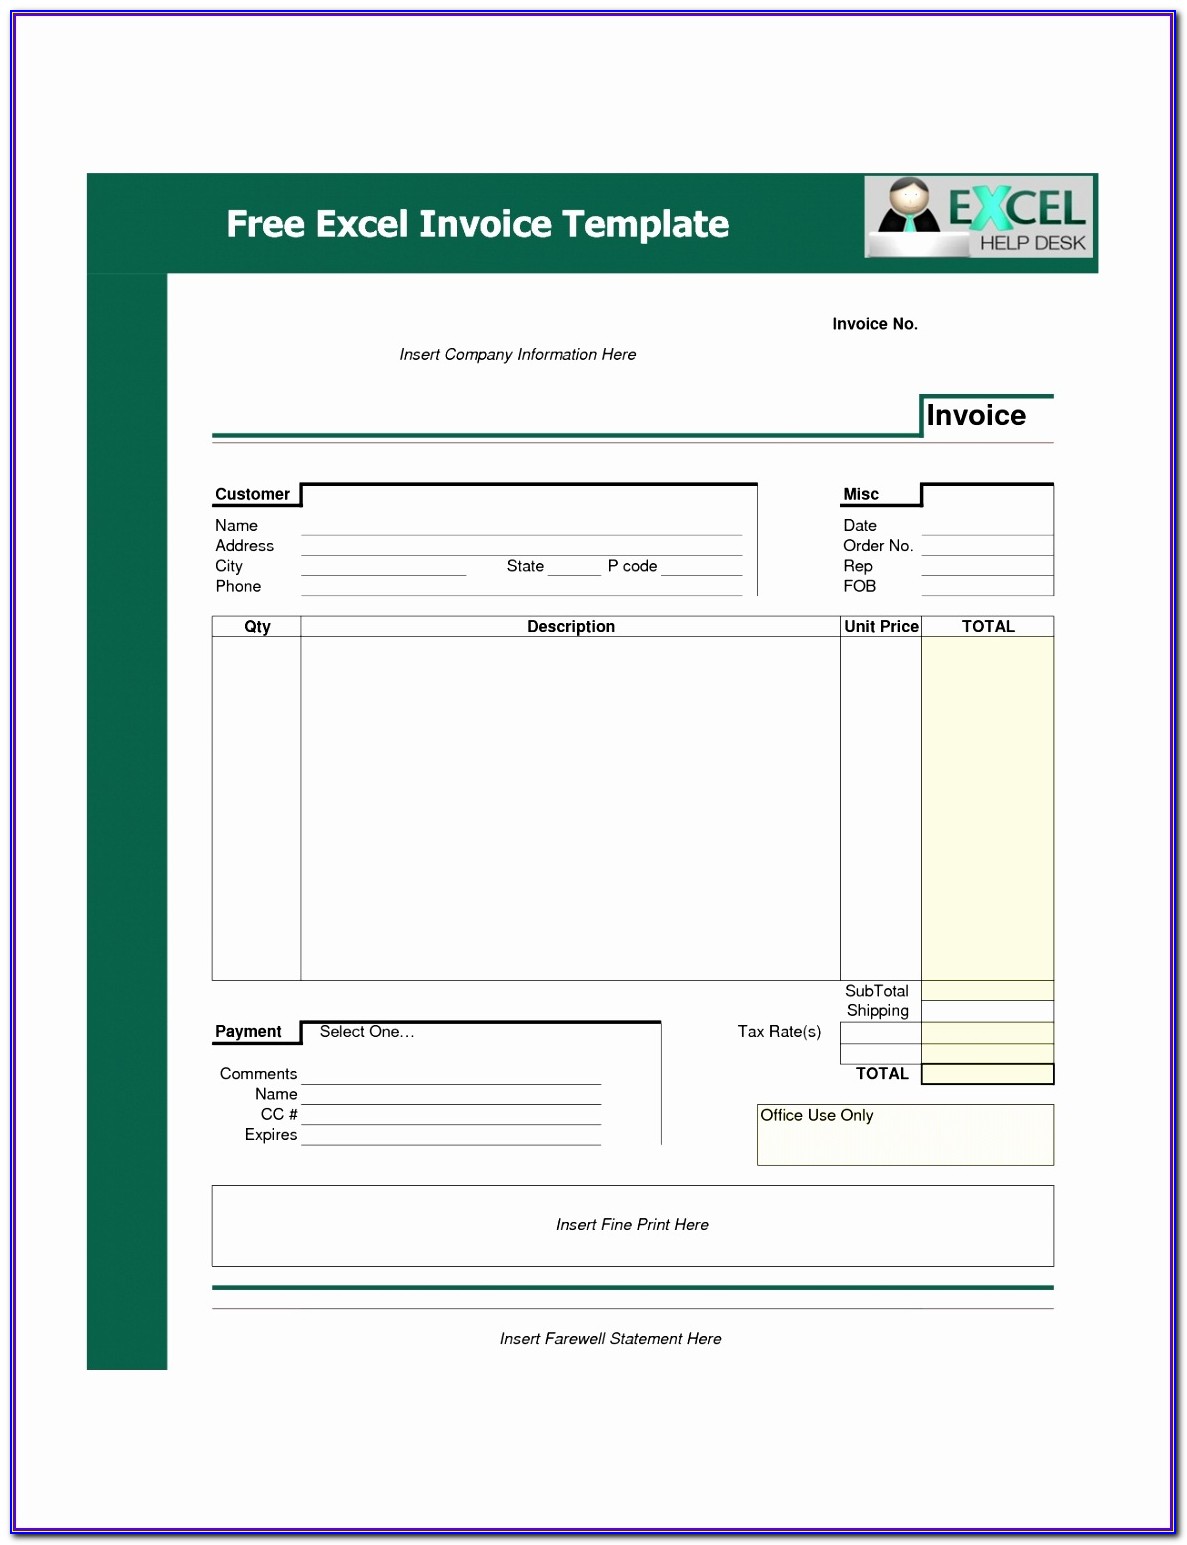 Examples Microsoft Excel Invoice Template Free Download Nssmr Unique Invoice Example Excel Exolabogados